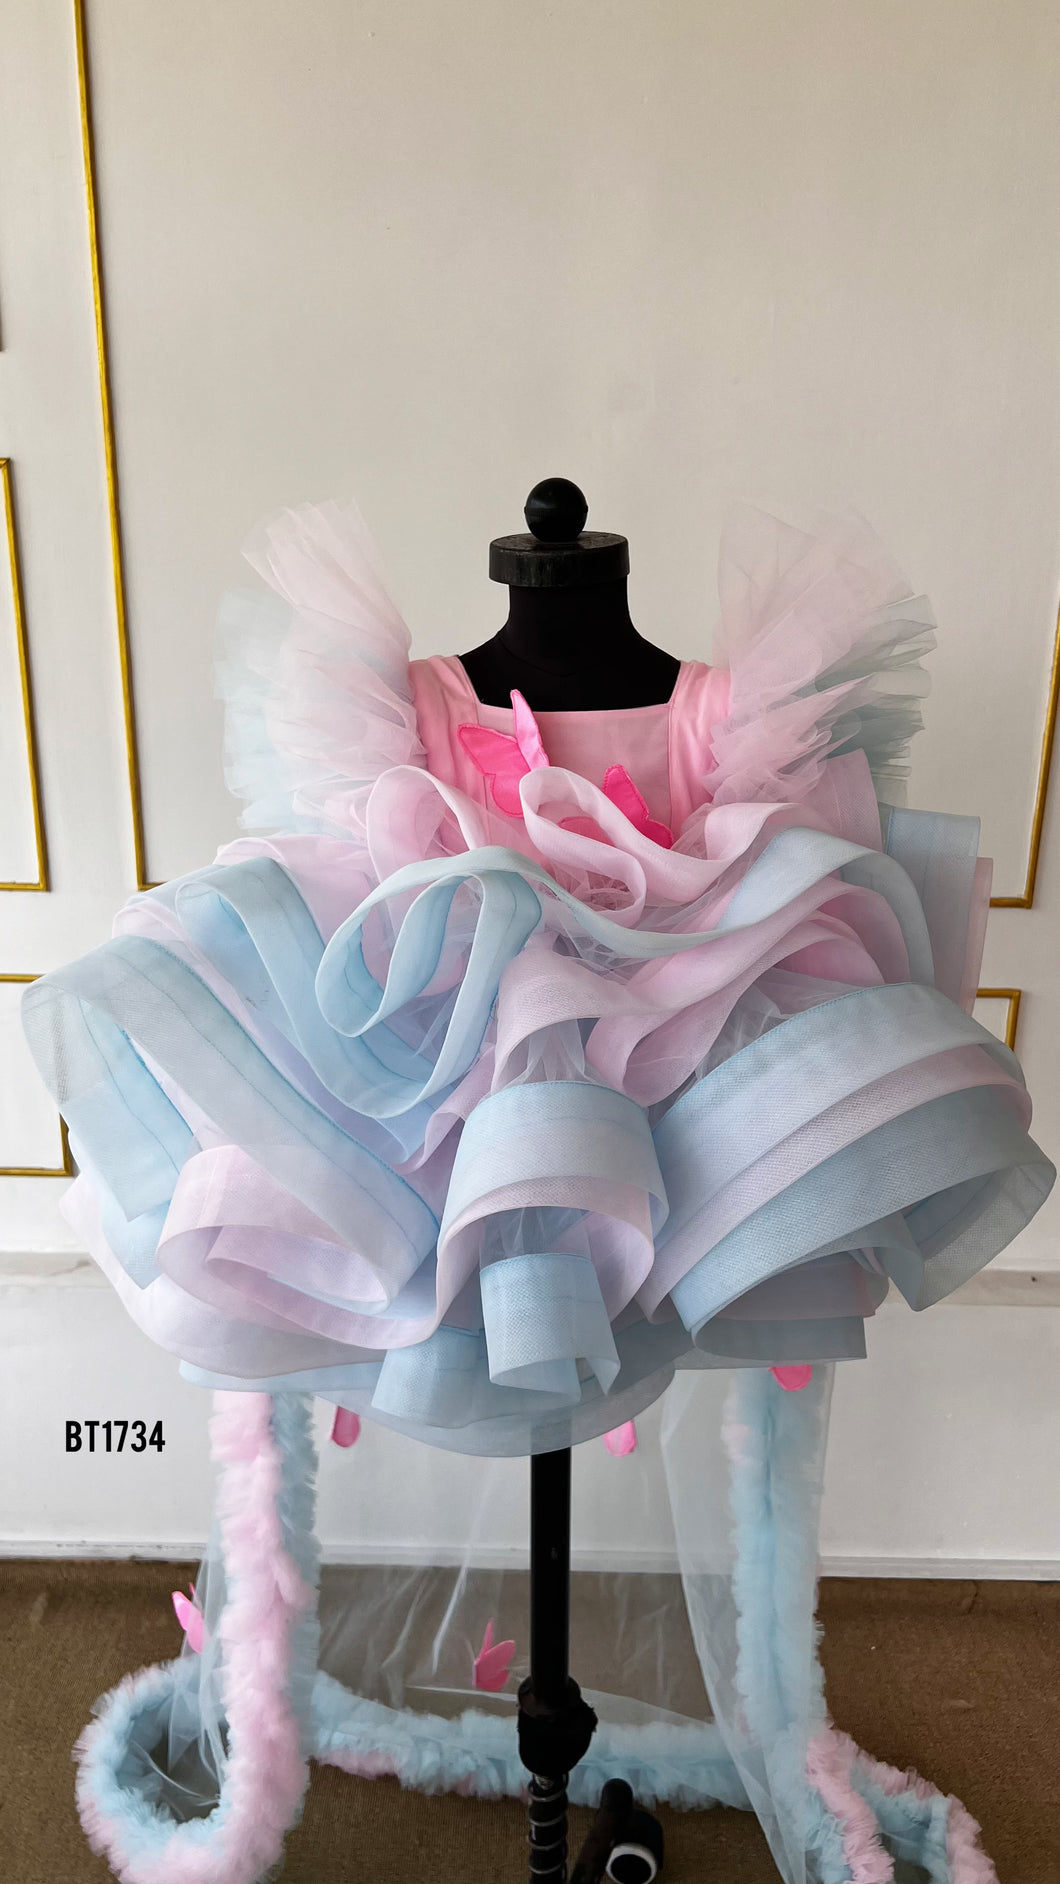 BT1734 Enchanted Pastel Carousel Dress - Whimsical Elegance for Precious Moments